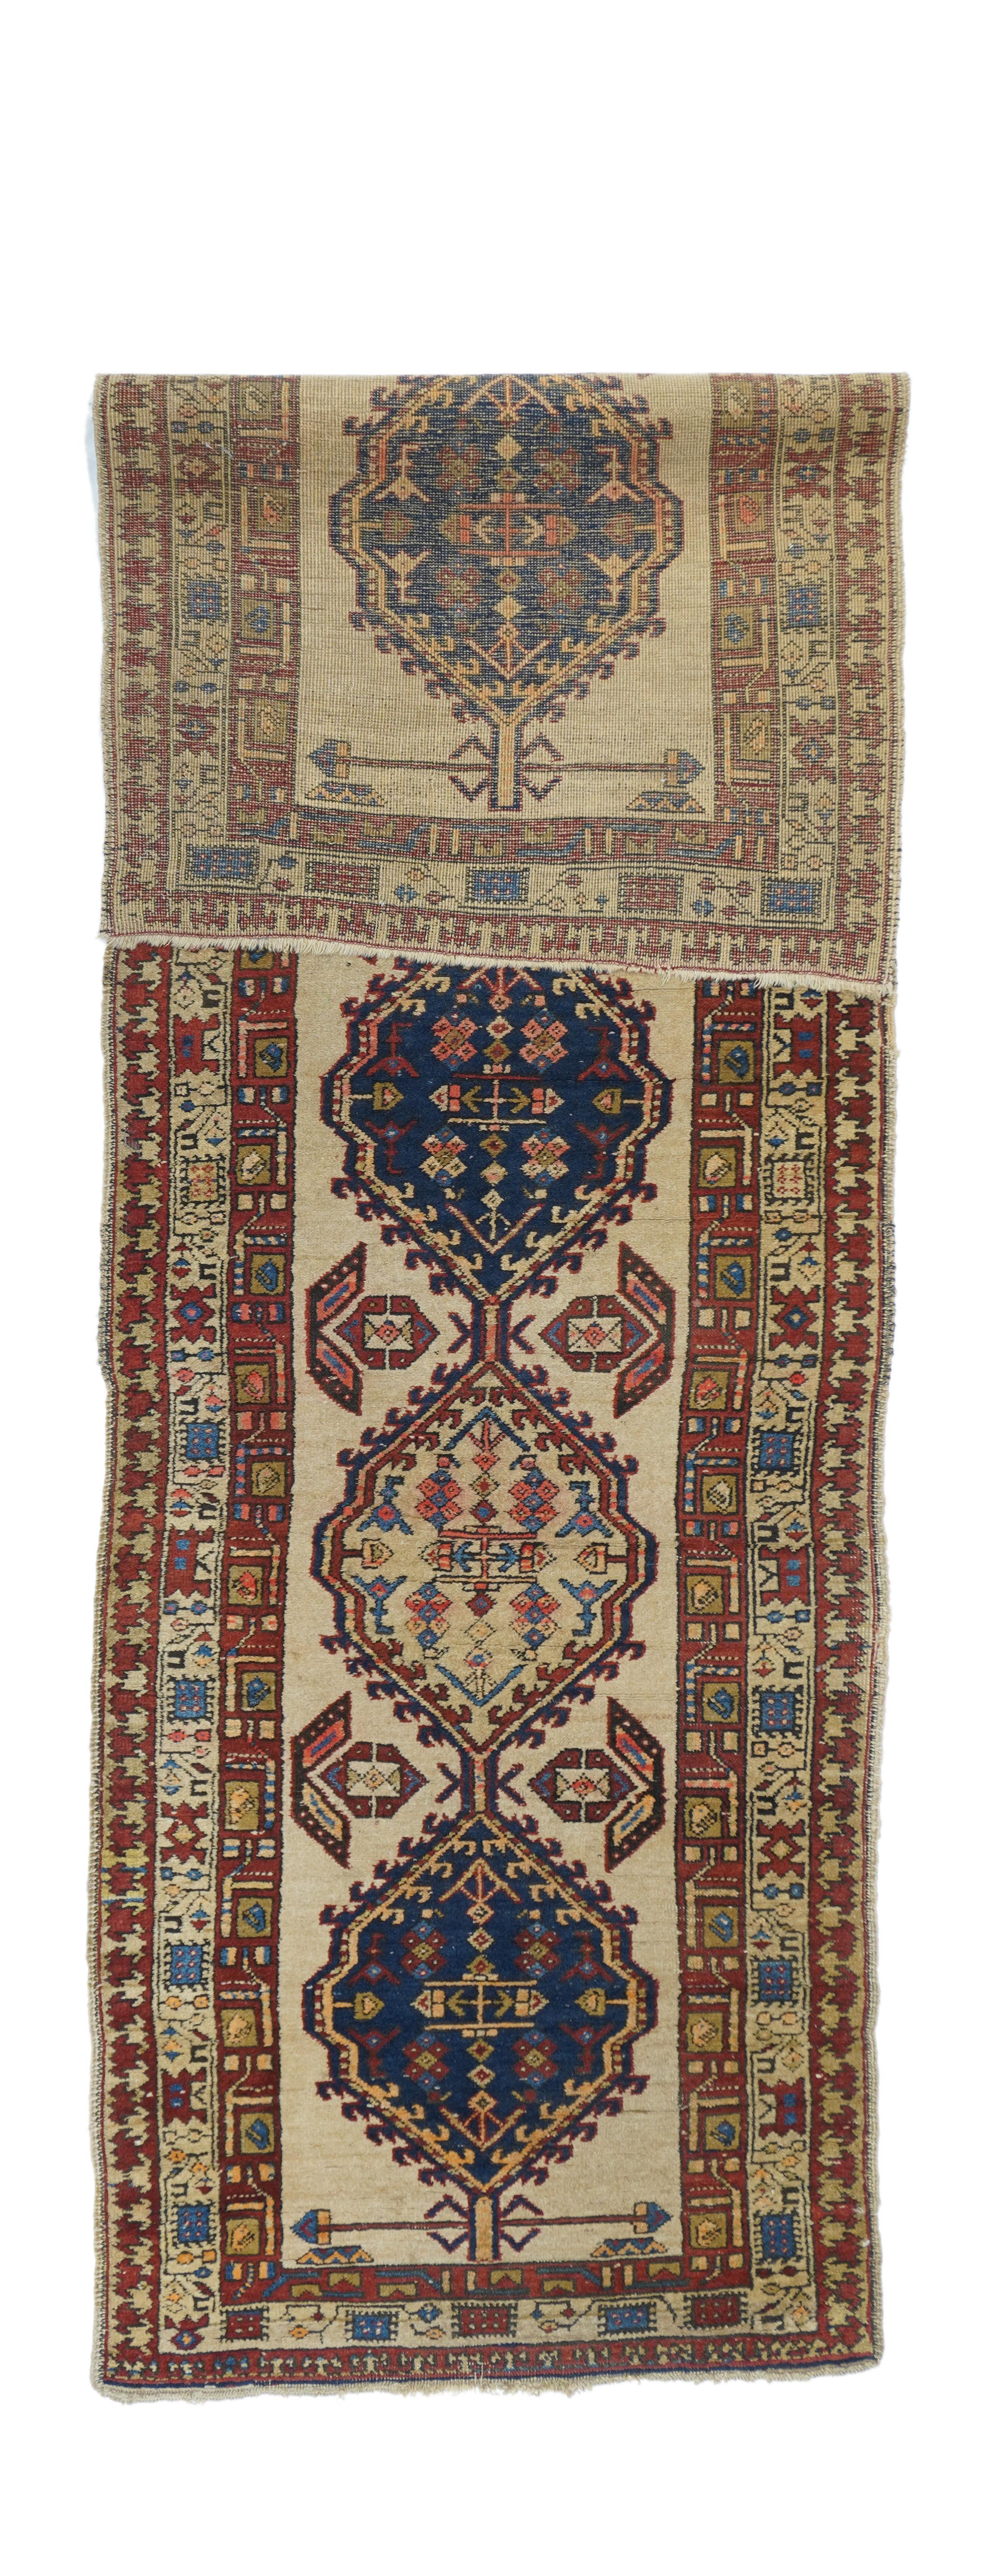 The milky camel field shows a pole medallion of five cartouches alternating in dark blue and straw, with hooked edges and stylized floral lateral fillers. Main border with fringed squares and formal stems, outer  Firm weave, medium weave.Red and